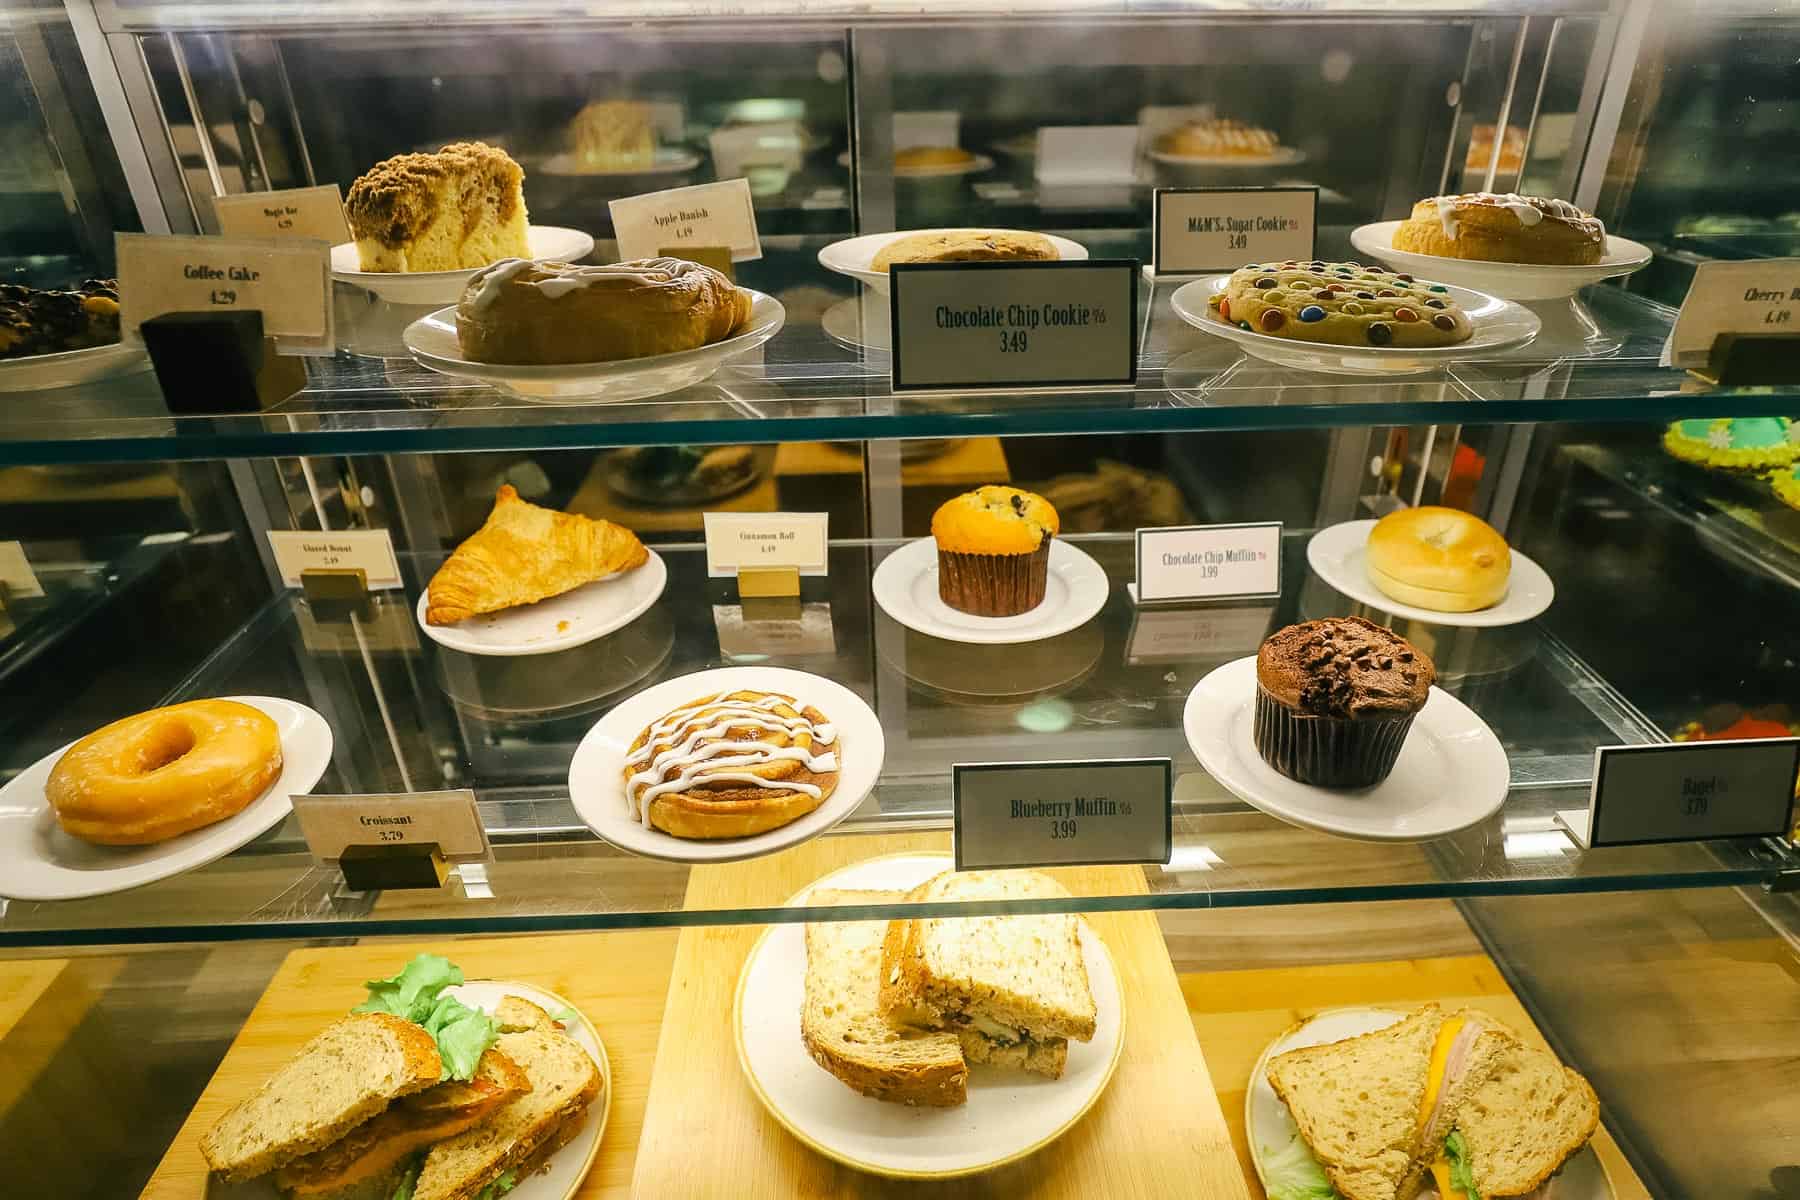 the dessert items on display like cookies, coffee cake, donuts, croissants, and muffins 